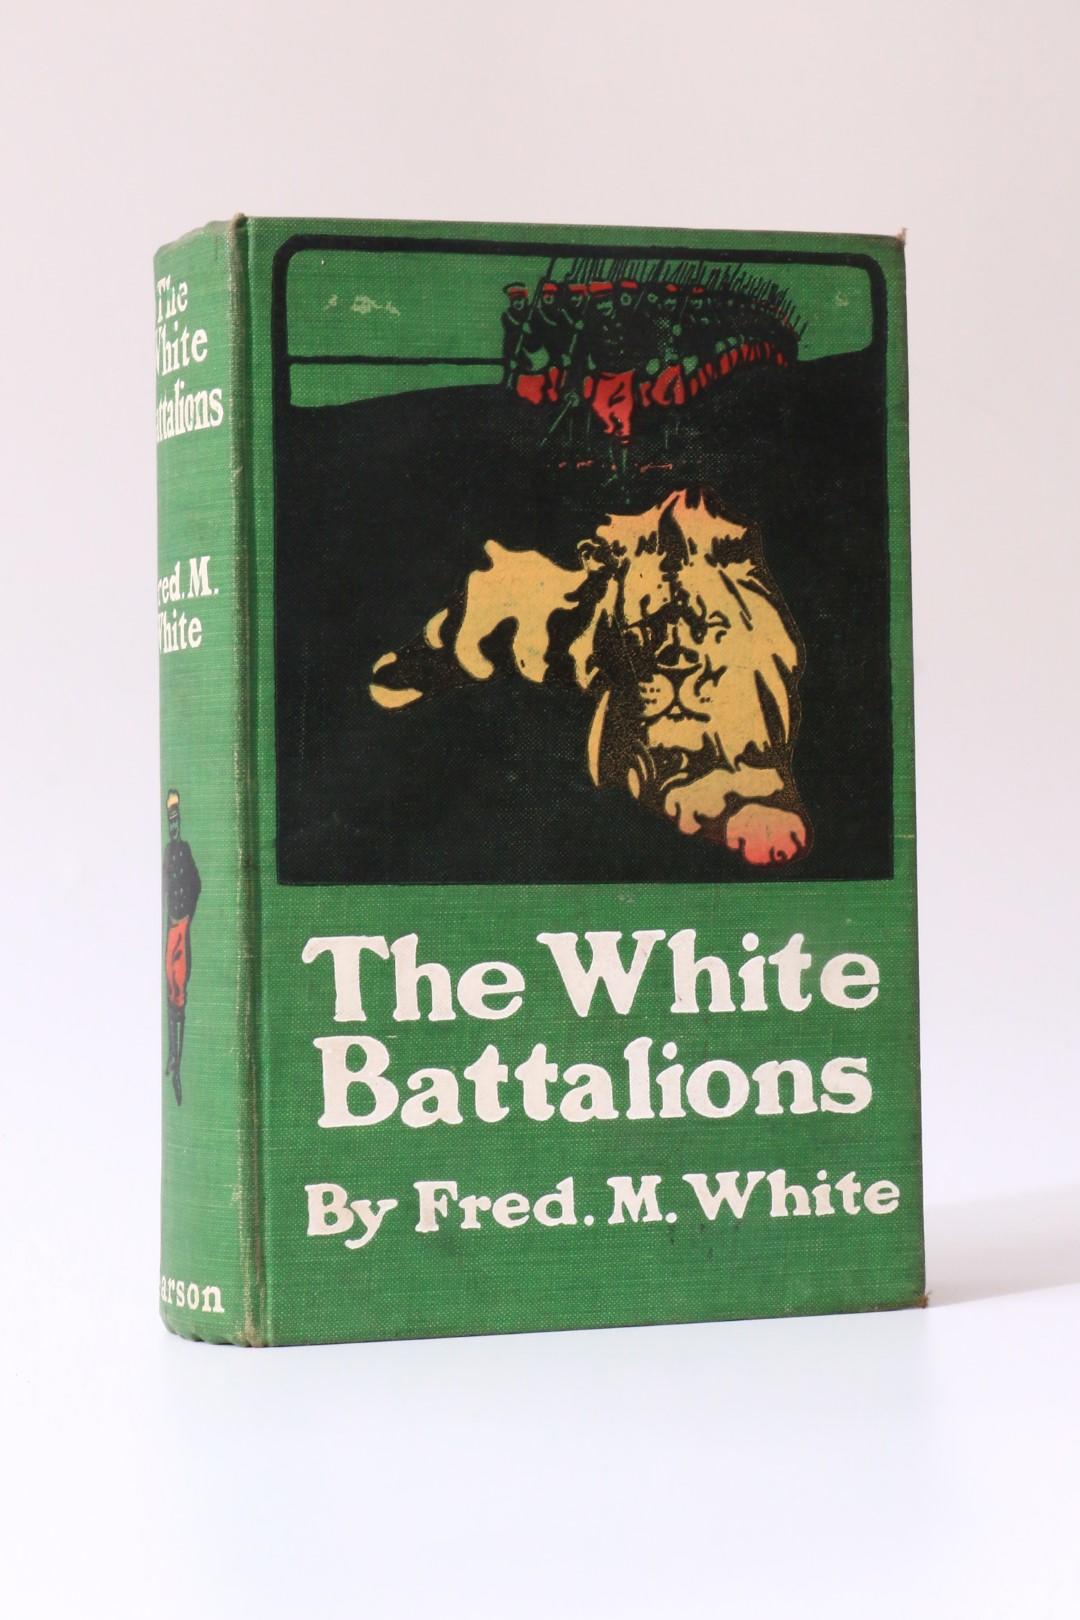 Fred M. White - The White Battalions - Pearson, 1900, First Edition.